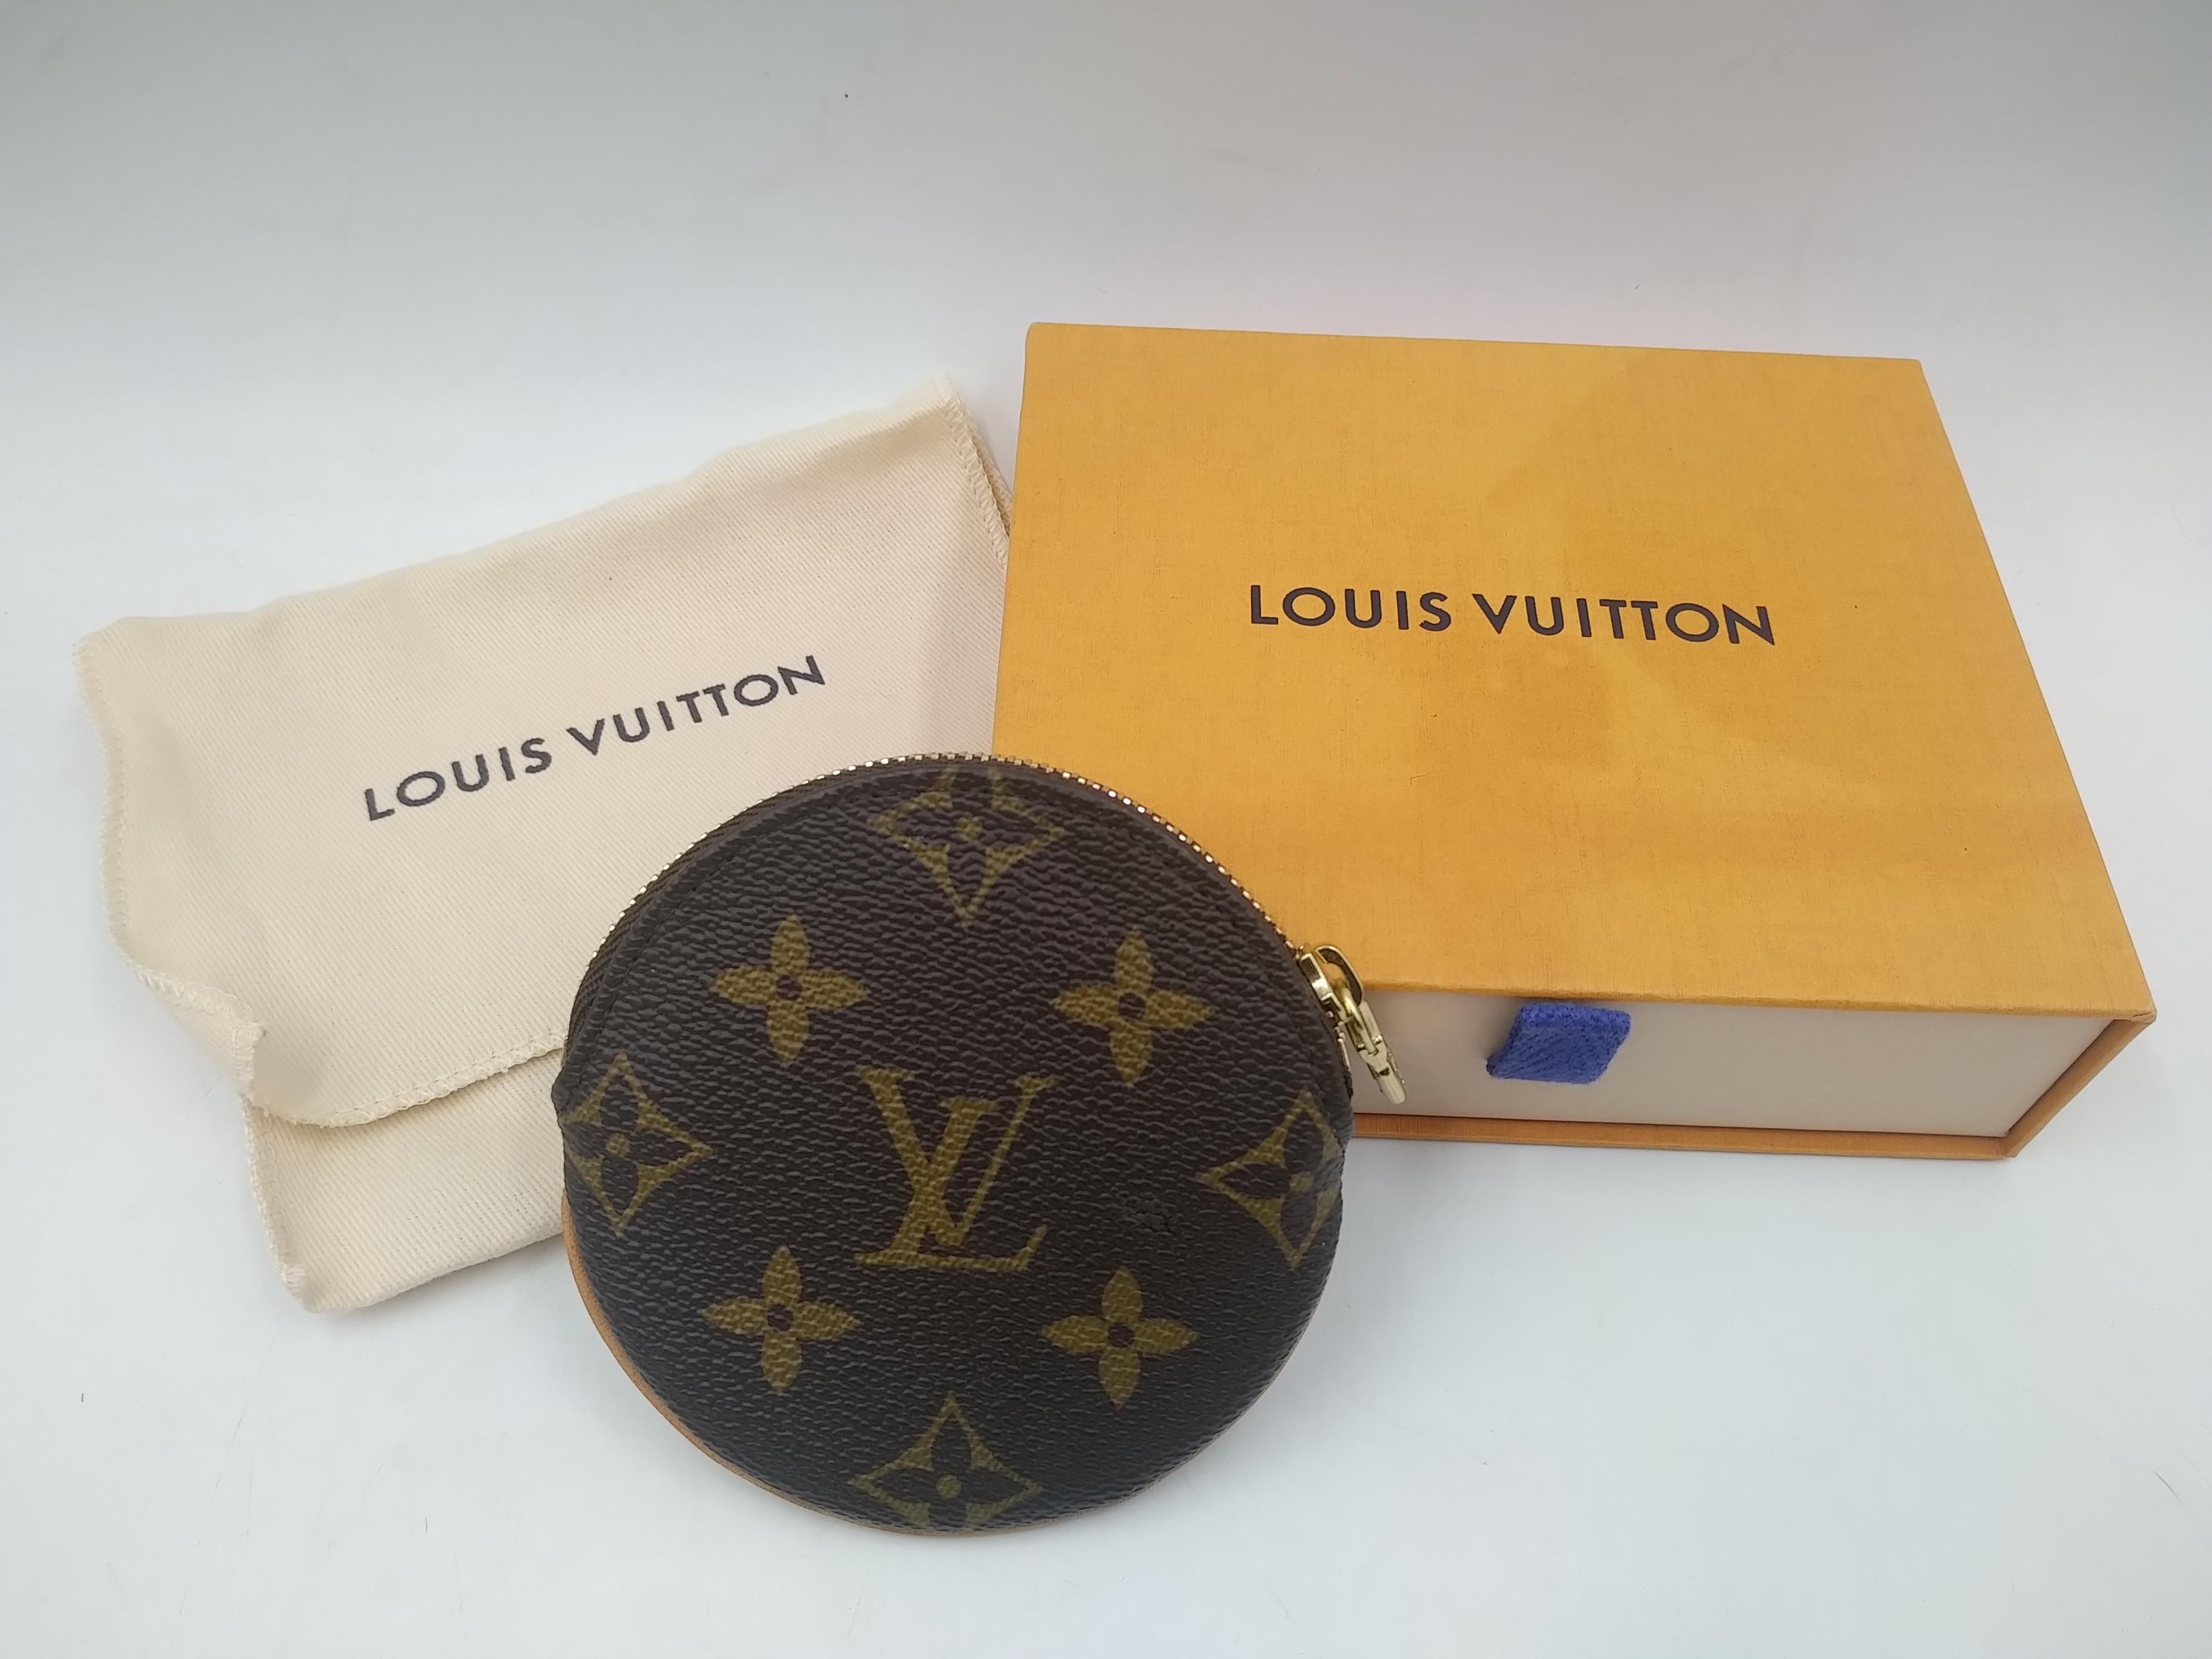 Louis Vuitton Monogram Canvas Round Coin Purse, 2017
- 100% authentic Louis Vuitton
- Monogram coated canvas with natural vachetta leather
- Single zip closure
- Brown cross-grain leather lining inside
- Hardware goldtone
- LV box and dust bag